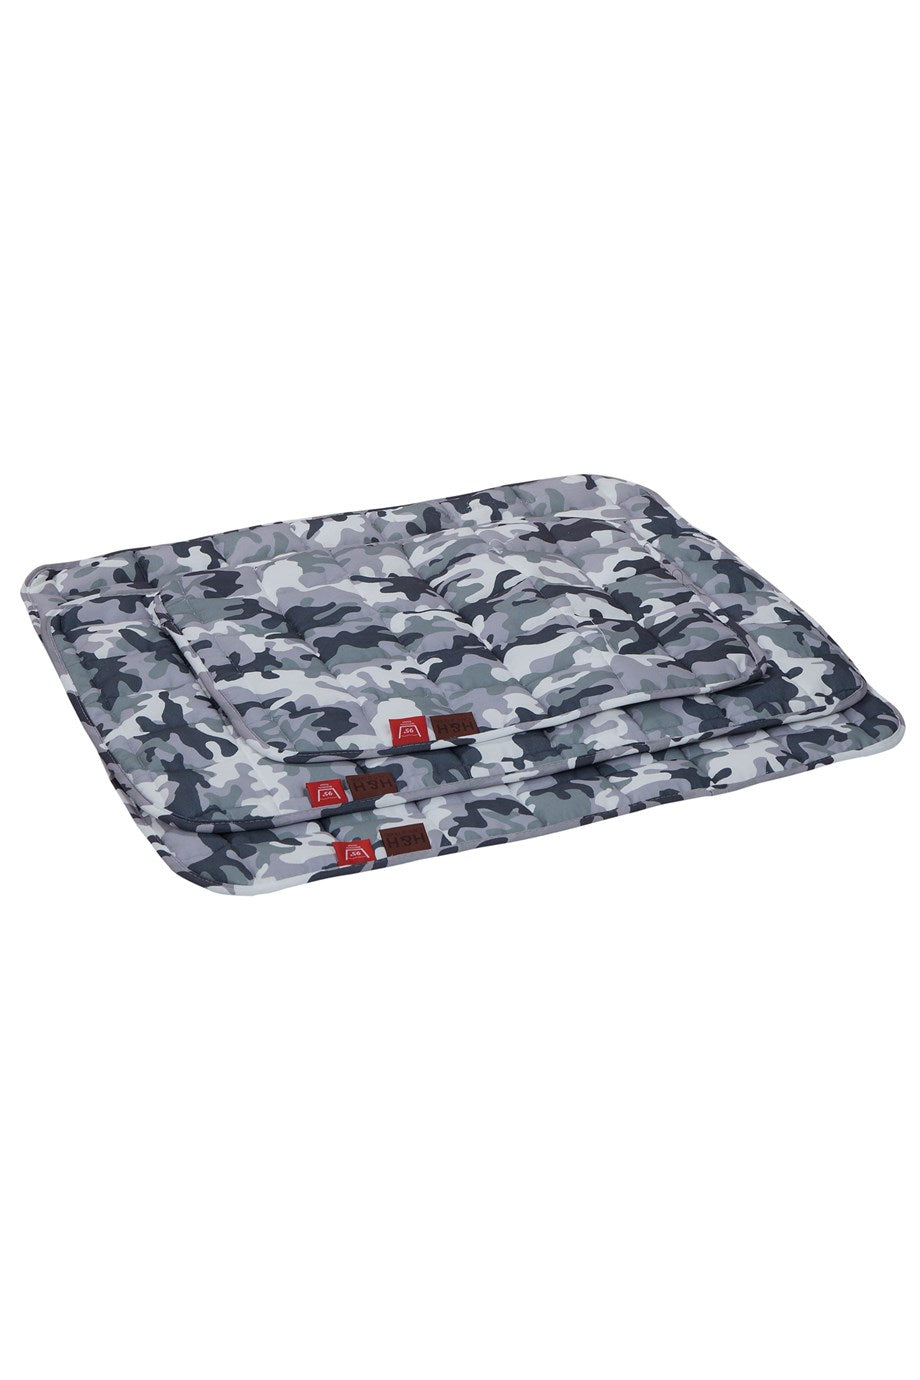 DENIZLI CONCEPT Camouflage Cat and Dog Cushion Bed